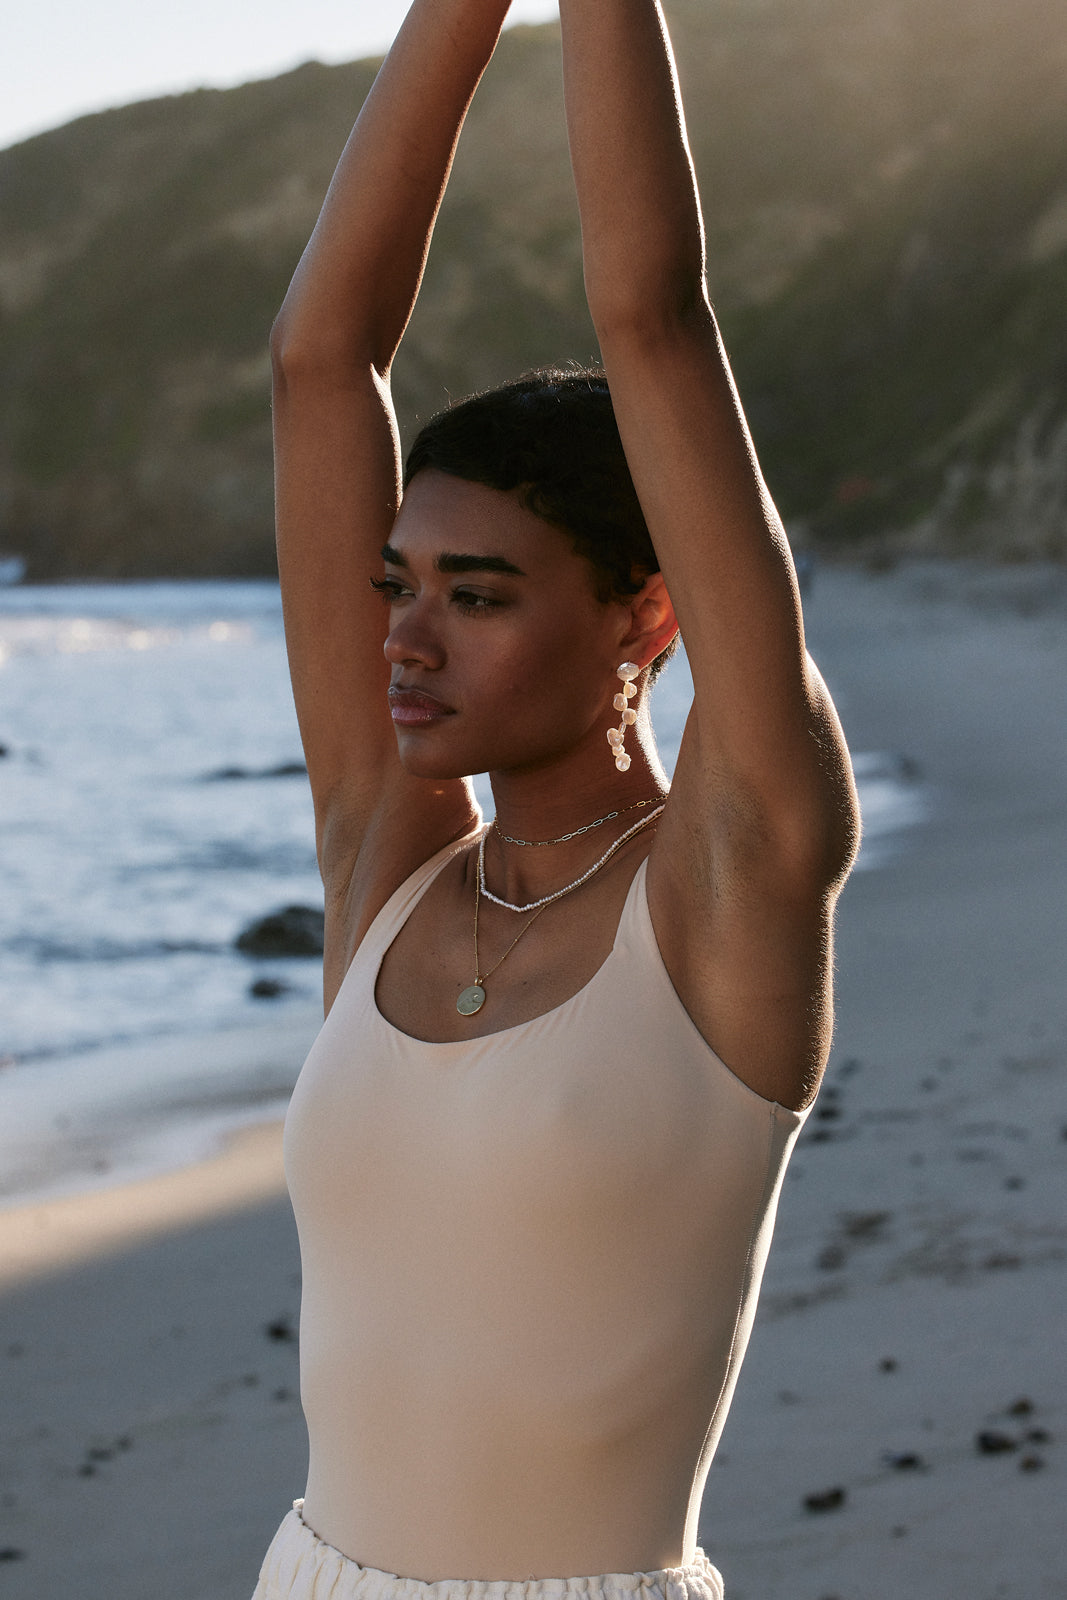 Model on the beach wearing Bryan Anthonys grit necklace